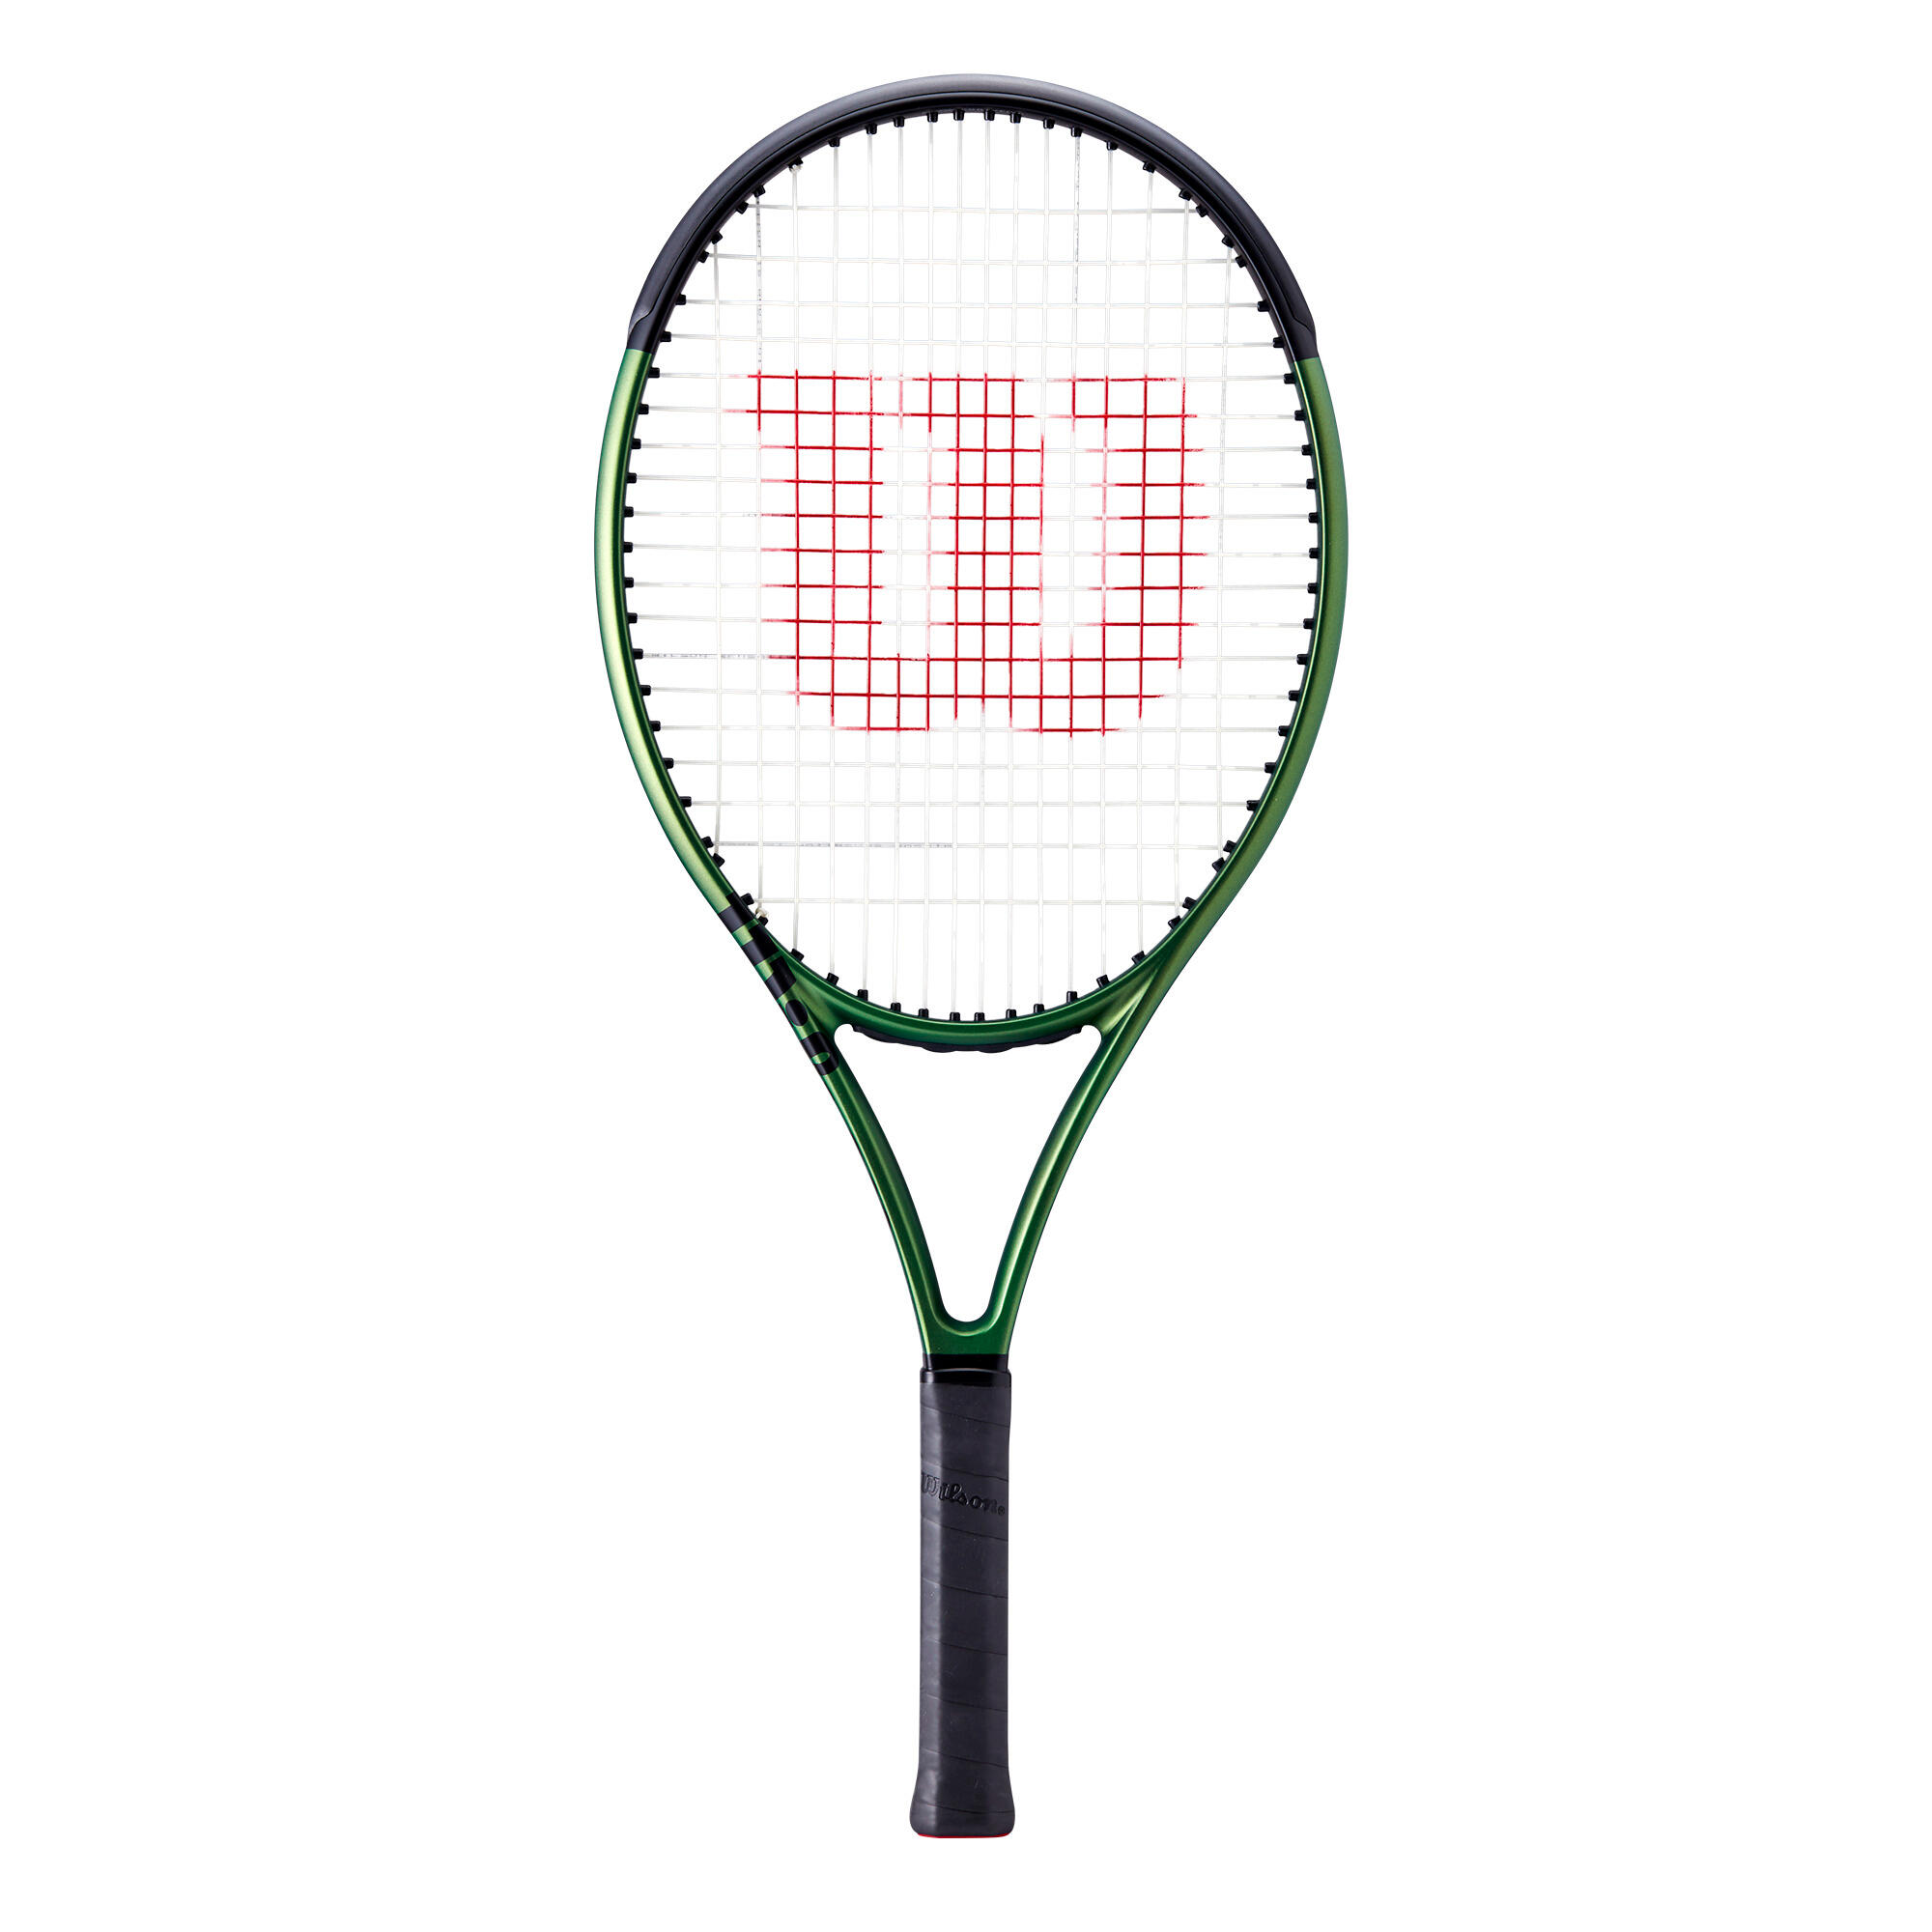 Kids' Tennis Racket Blade V8 25 inches - Green/Copper 1/3